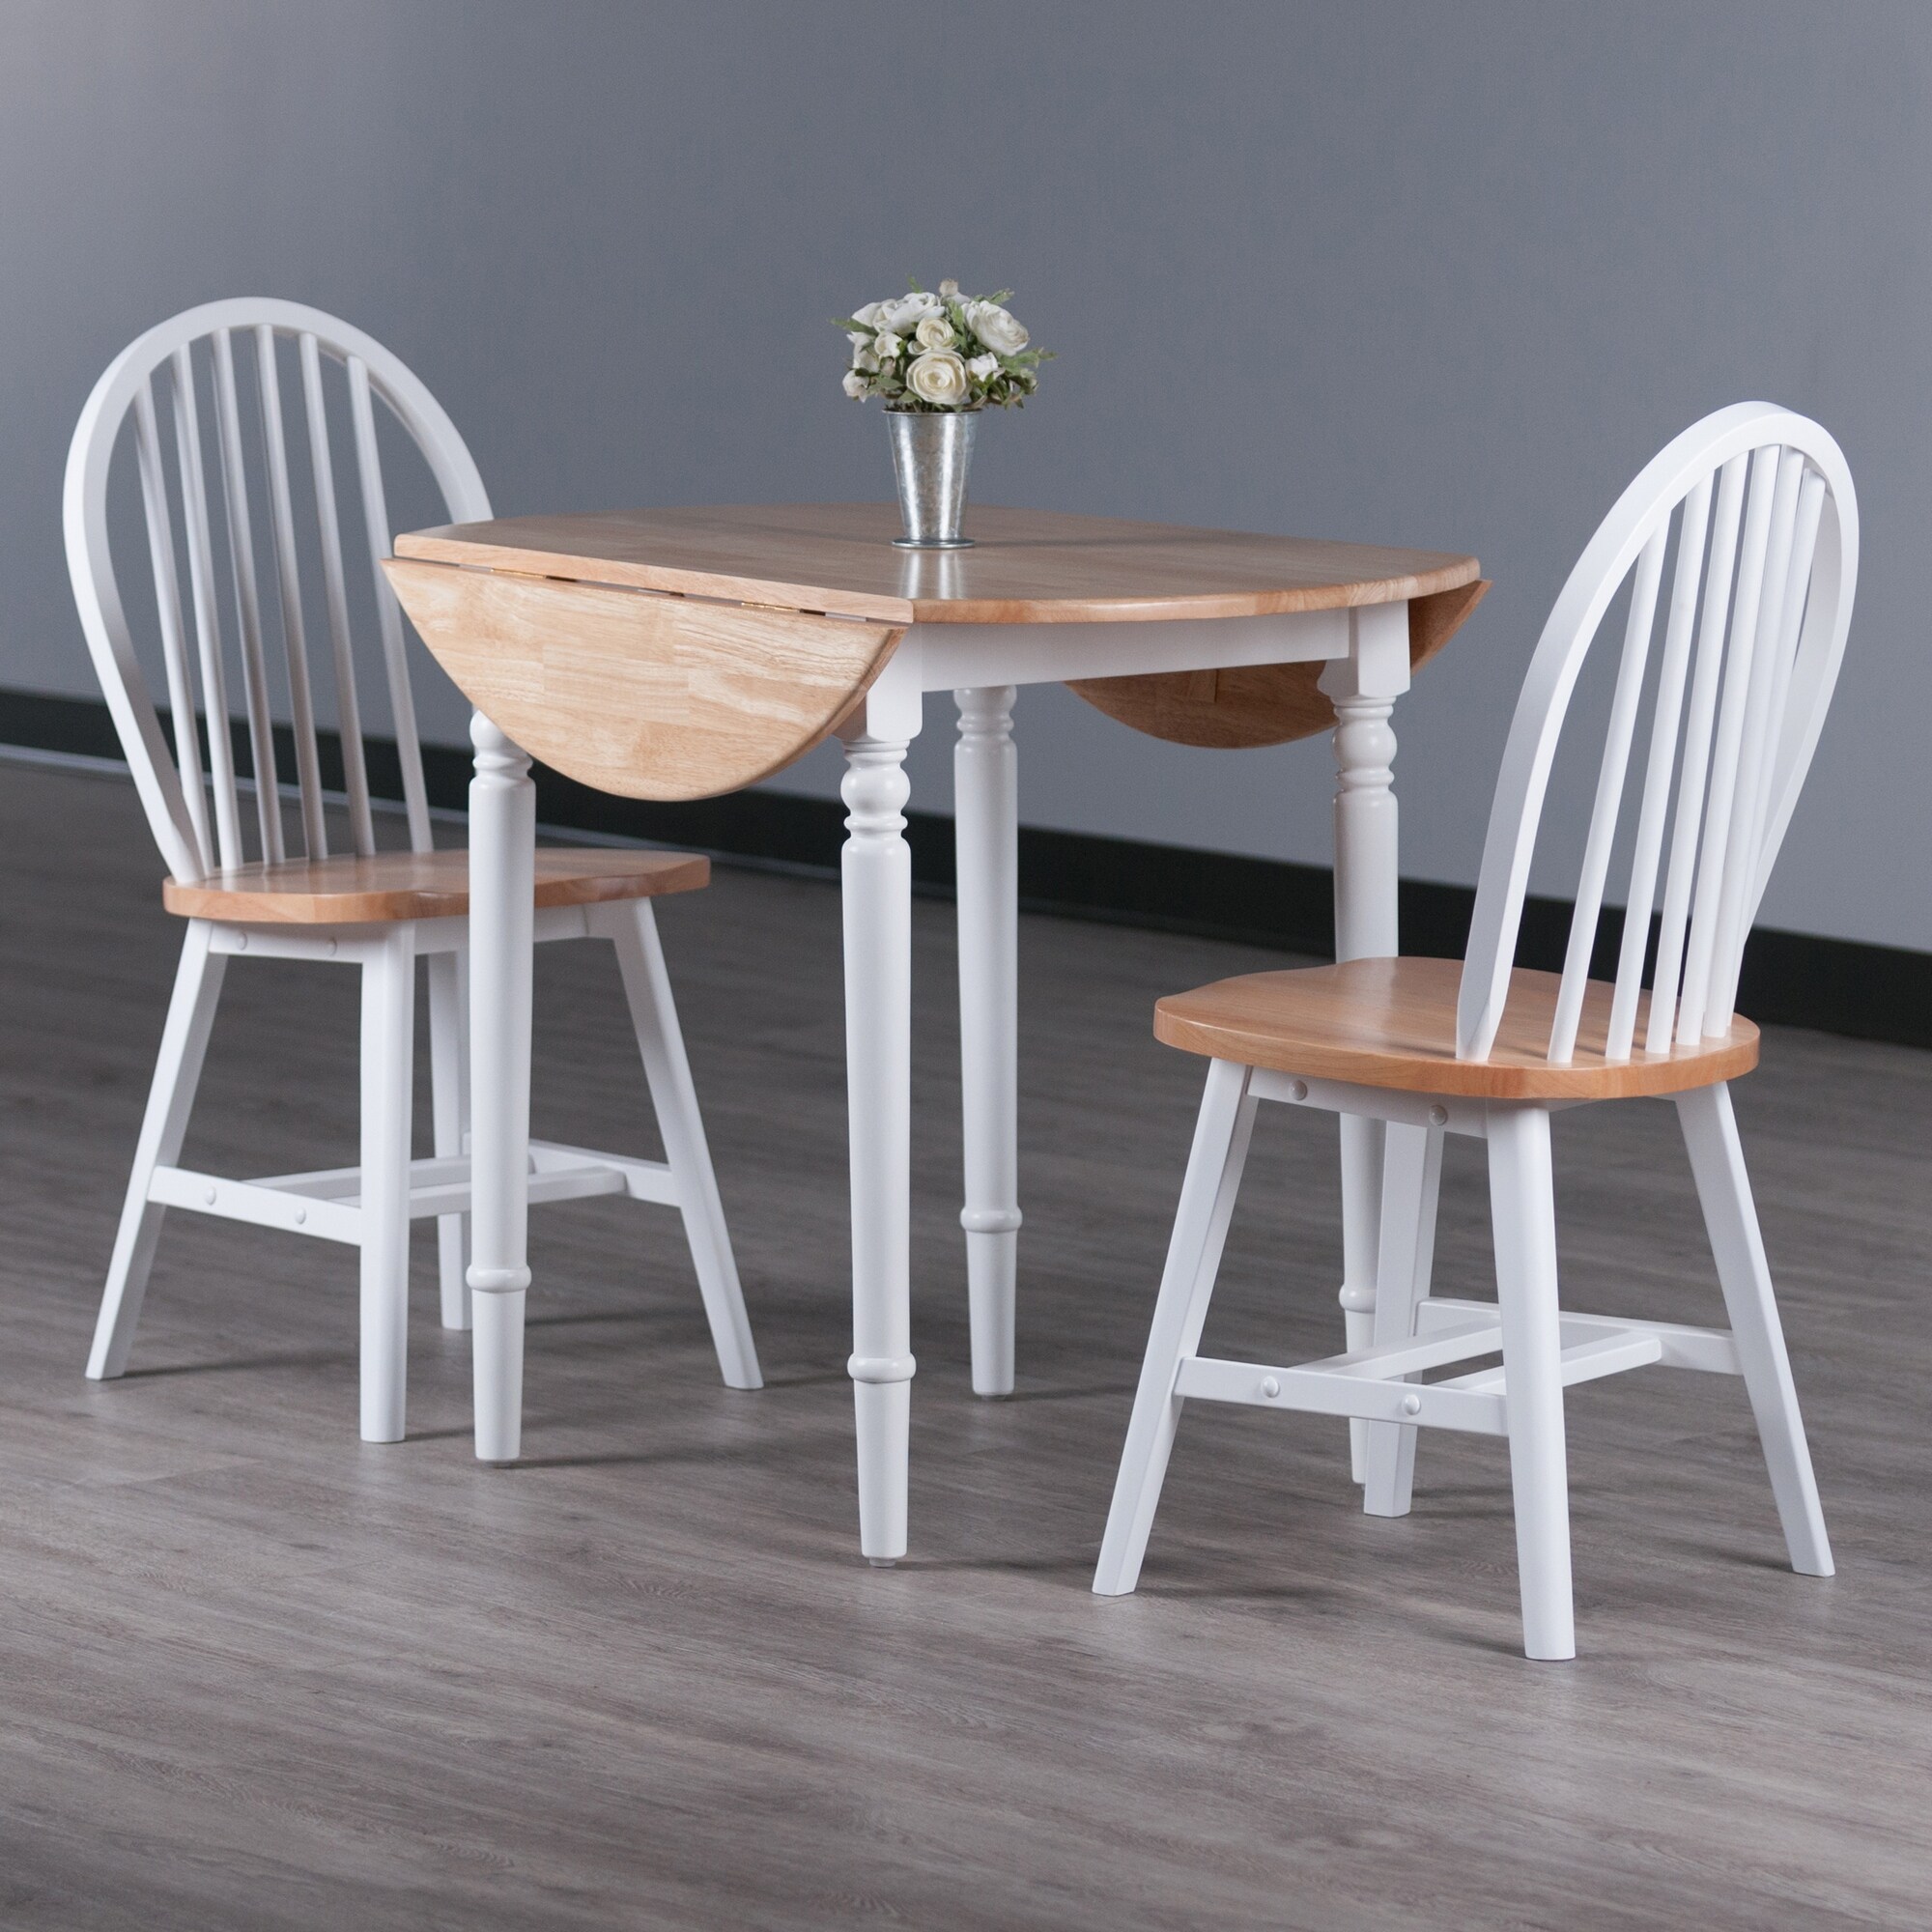 Sorella 3-Pc Drop Leaf Dining Table with Chairs, Natural and White